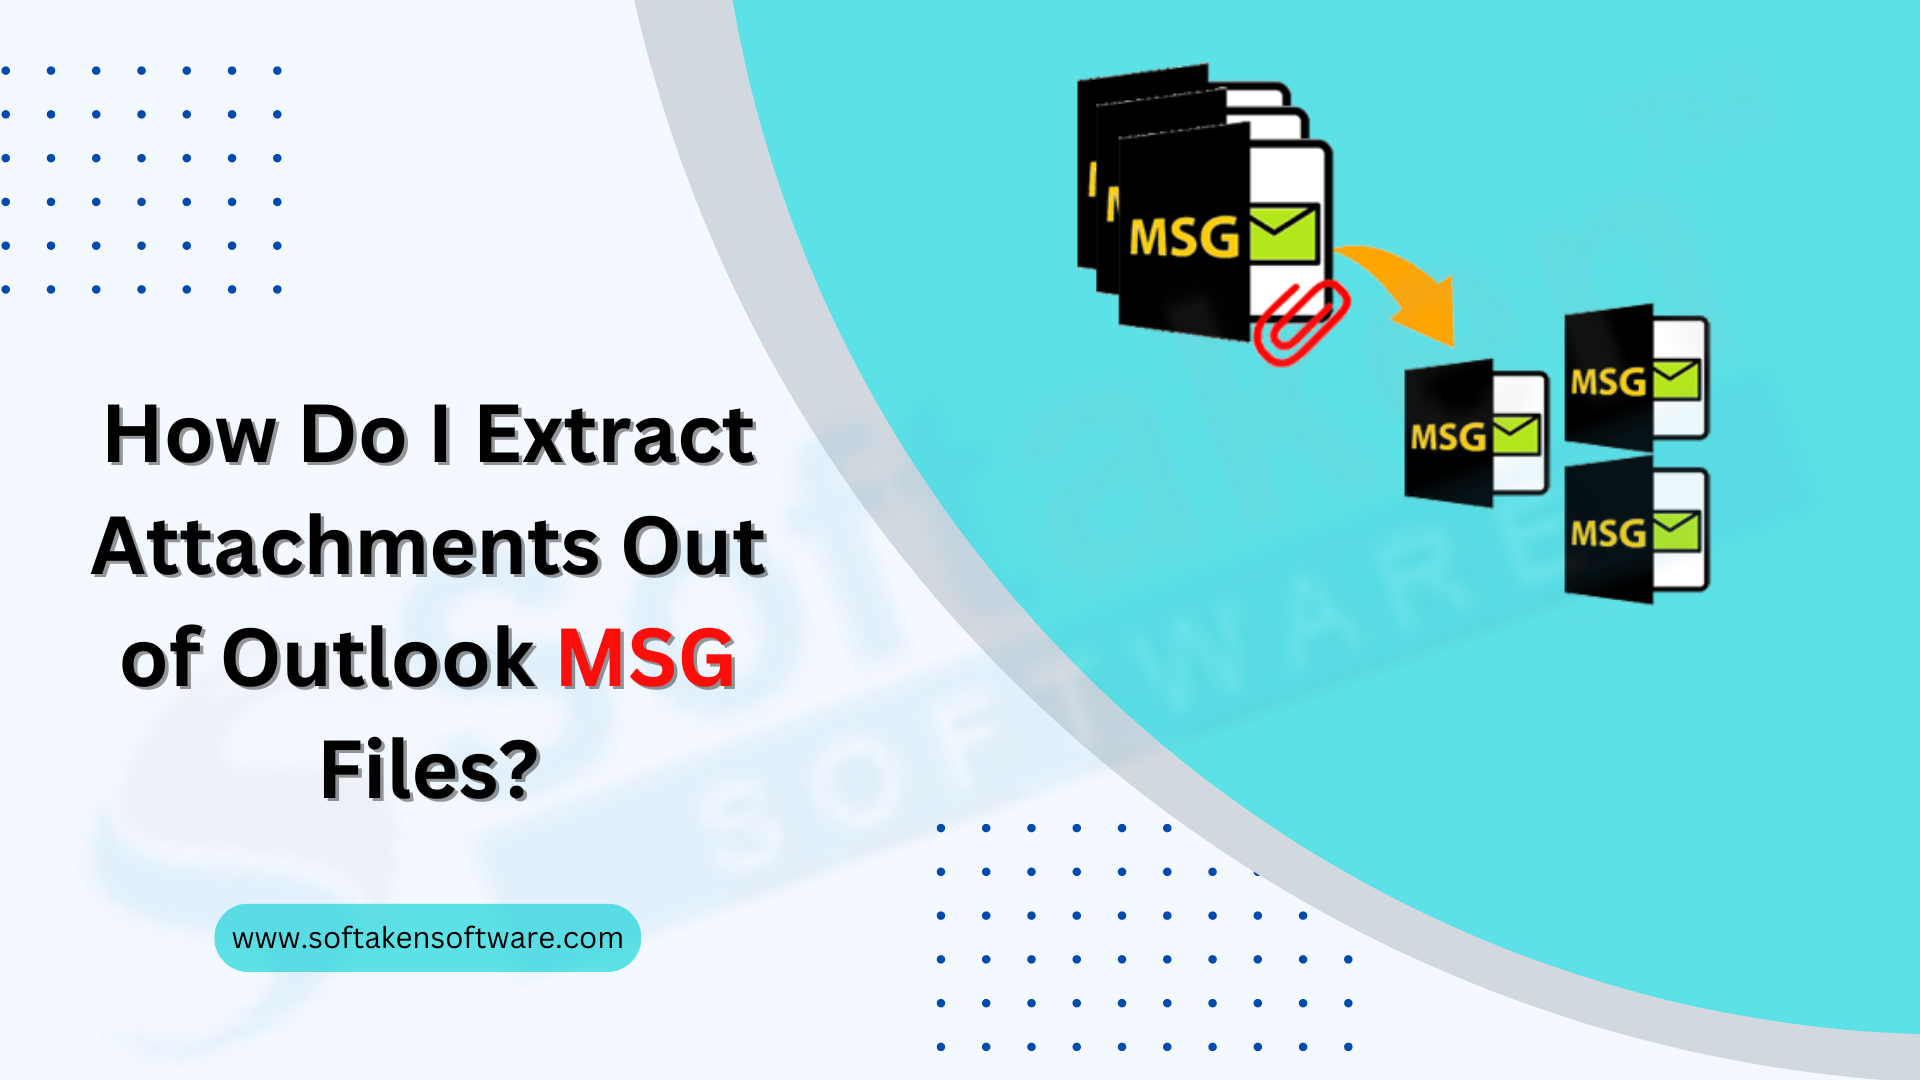 Extract Attachments Out of Outlook MSG Files